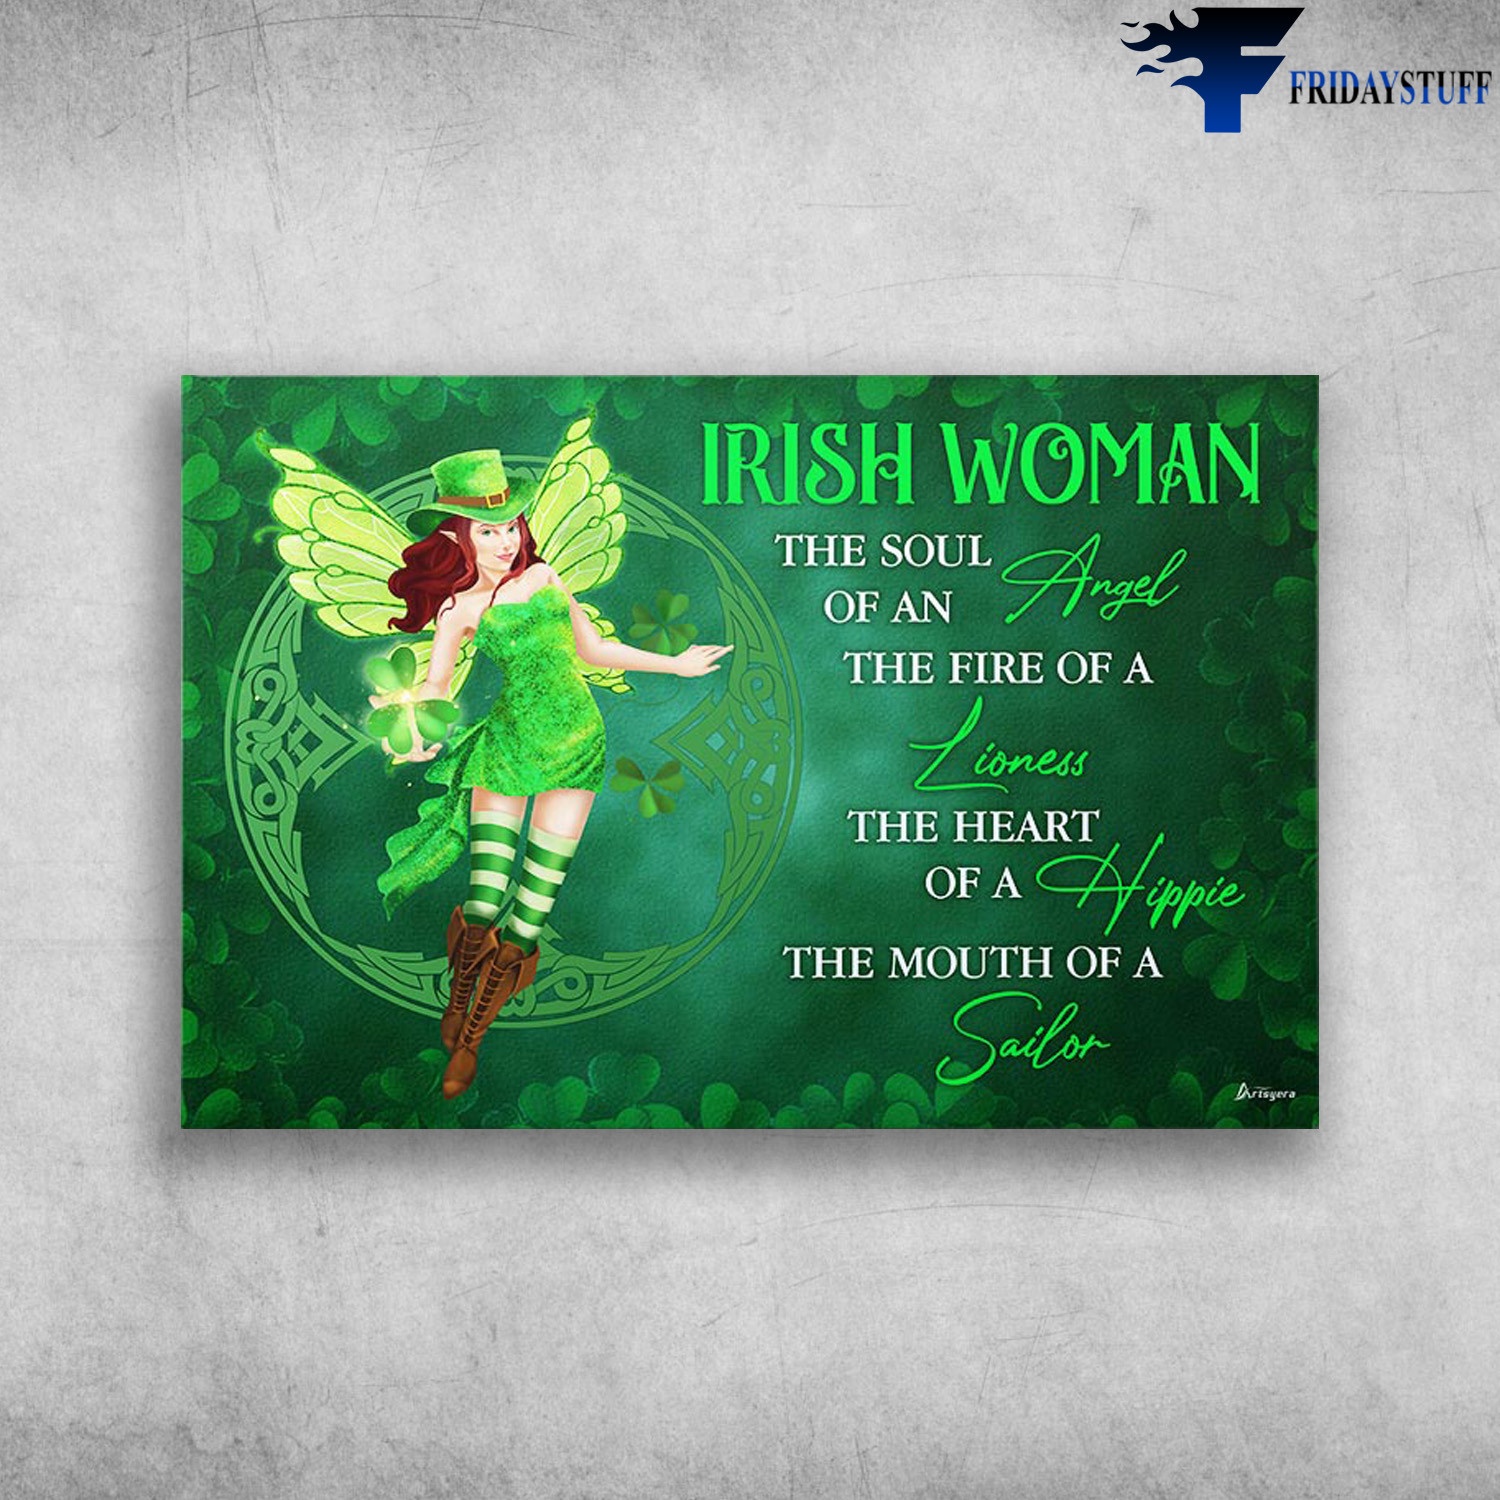 Irish Woman - The Soul Of An Angel, The Fire Of A Lioness, The Heart Of A Hippie, The Mouth Of A Sailor